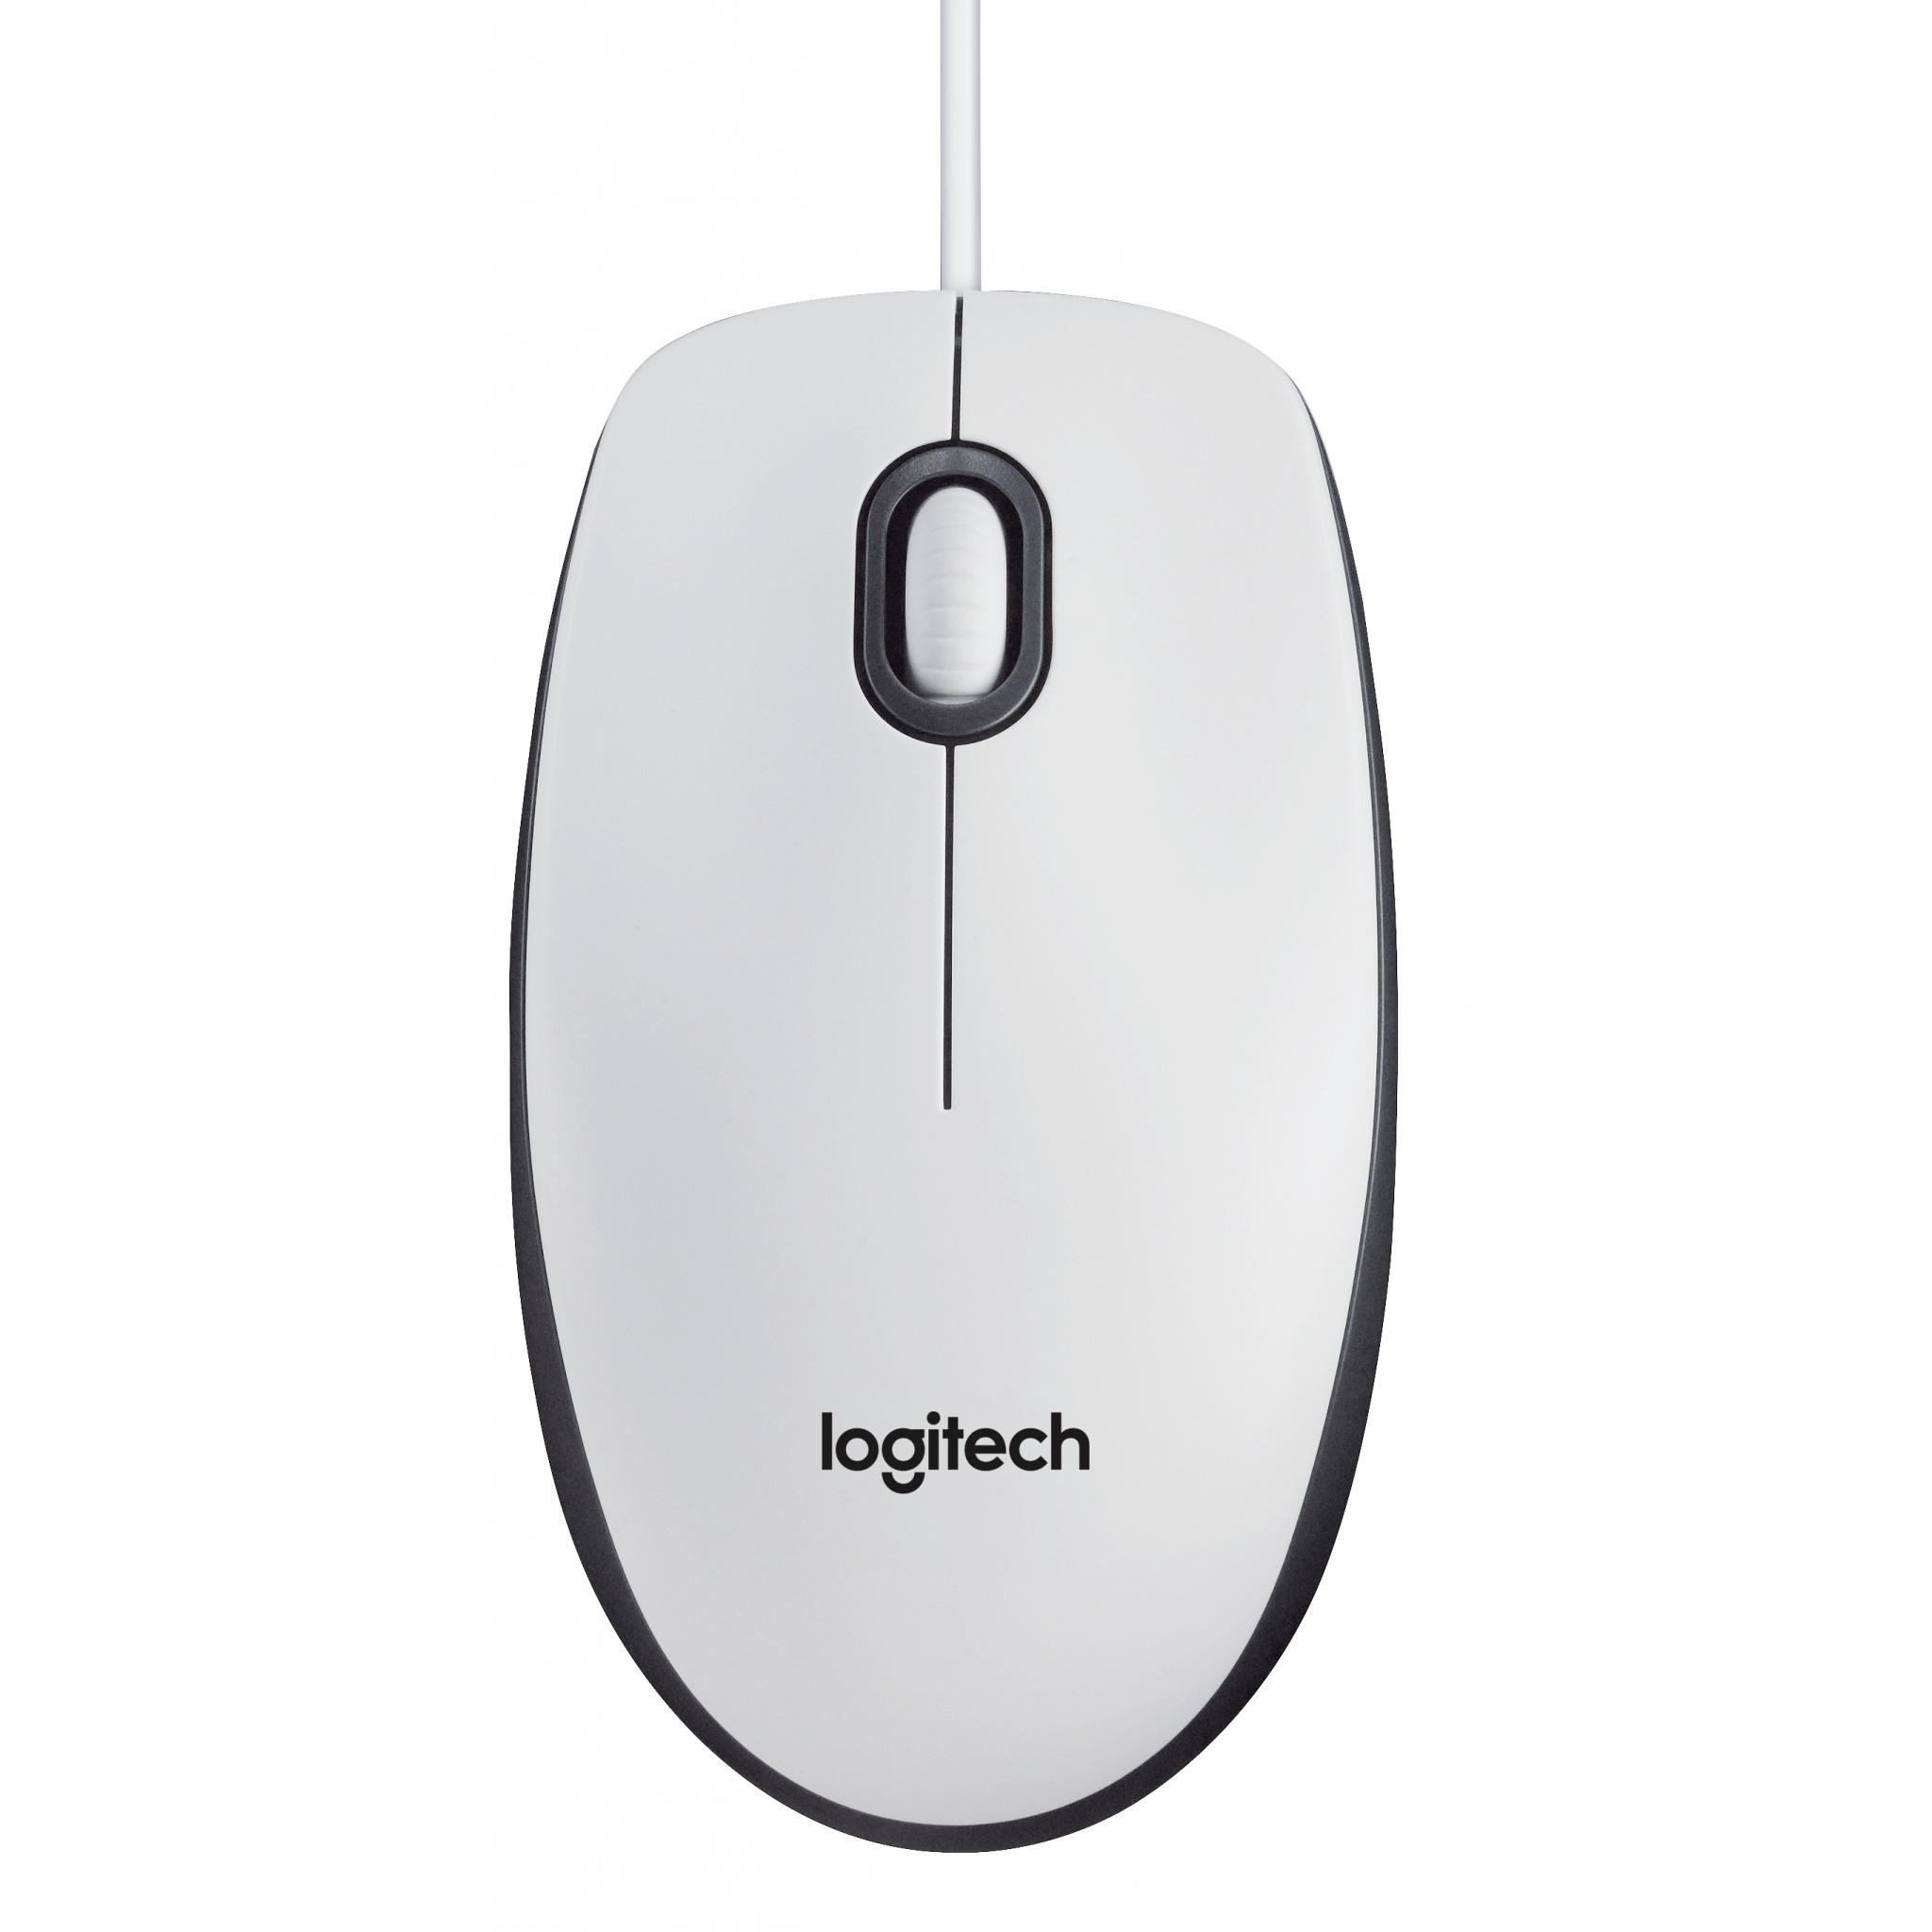 USB 1000 dpi-3 Button w/ Scroll Logitech M100 Wired Optical Mouse